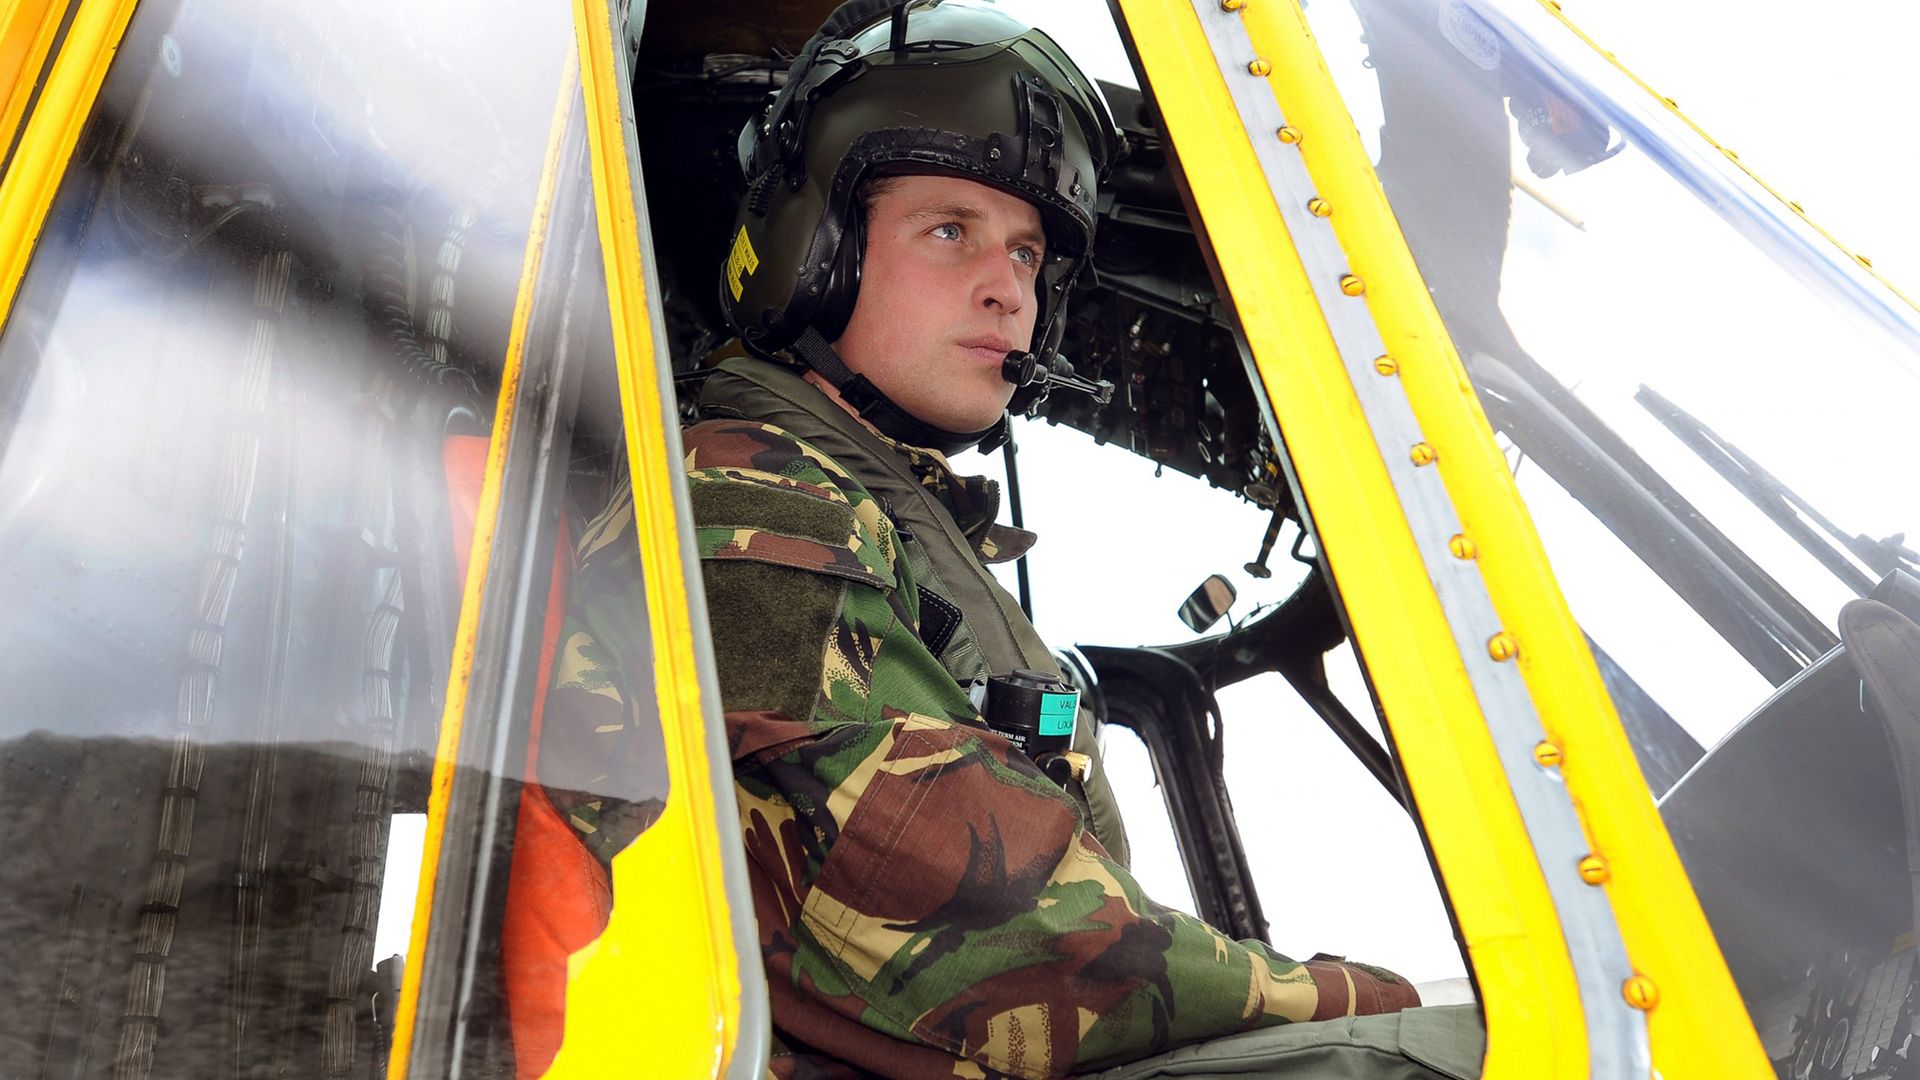 Prince William – a helicopter pilot